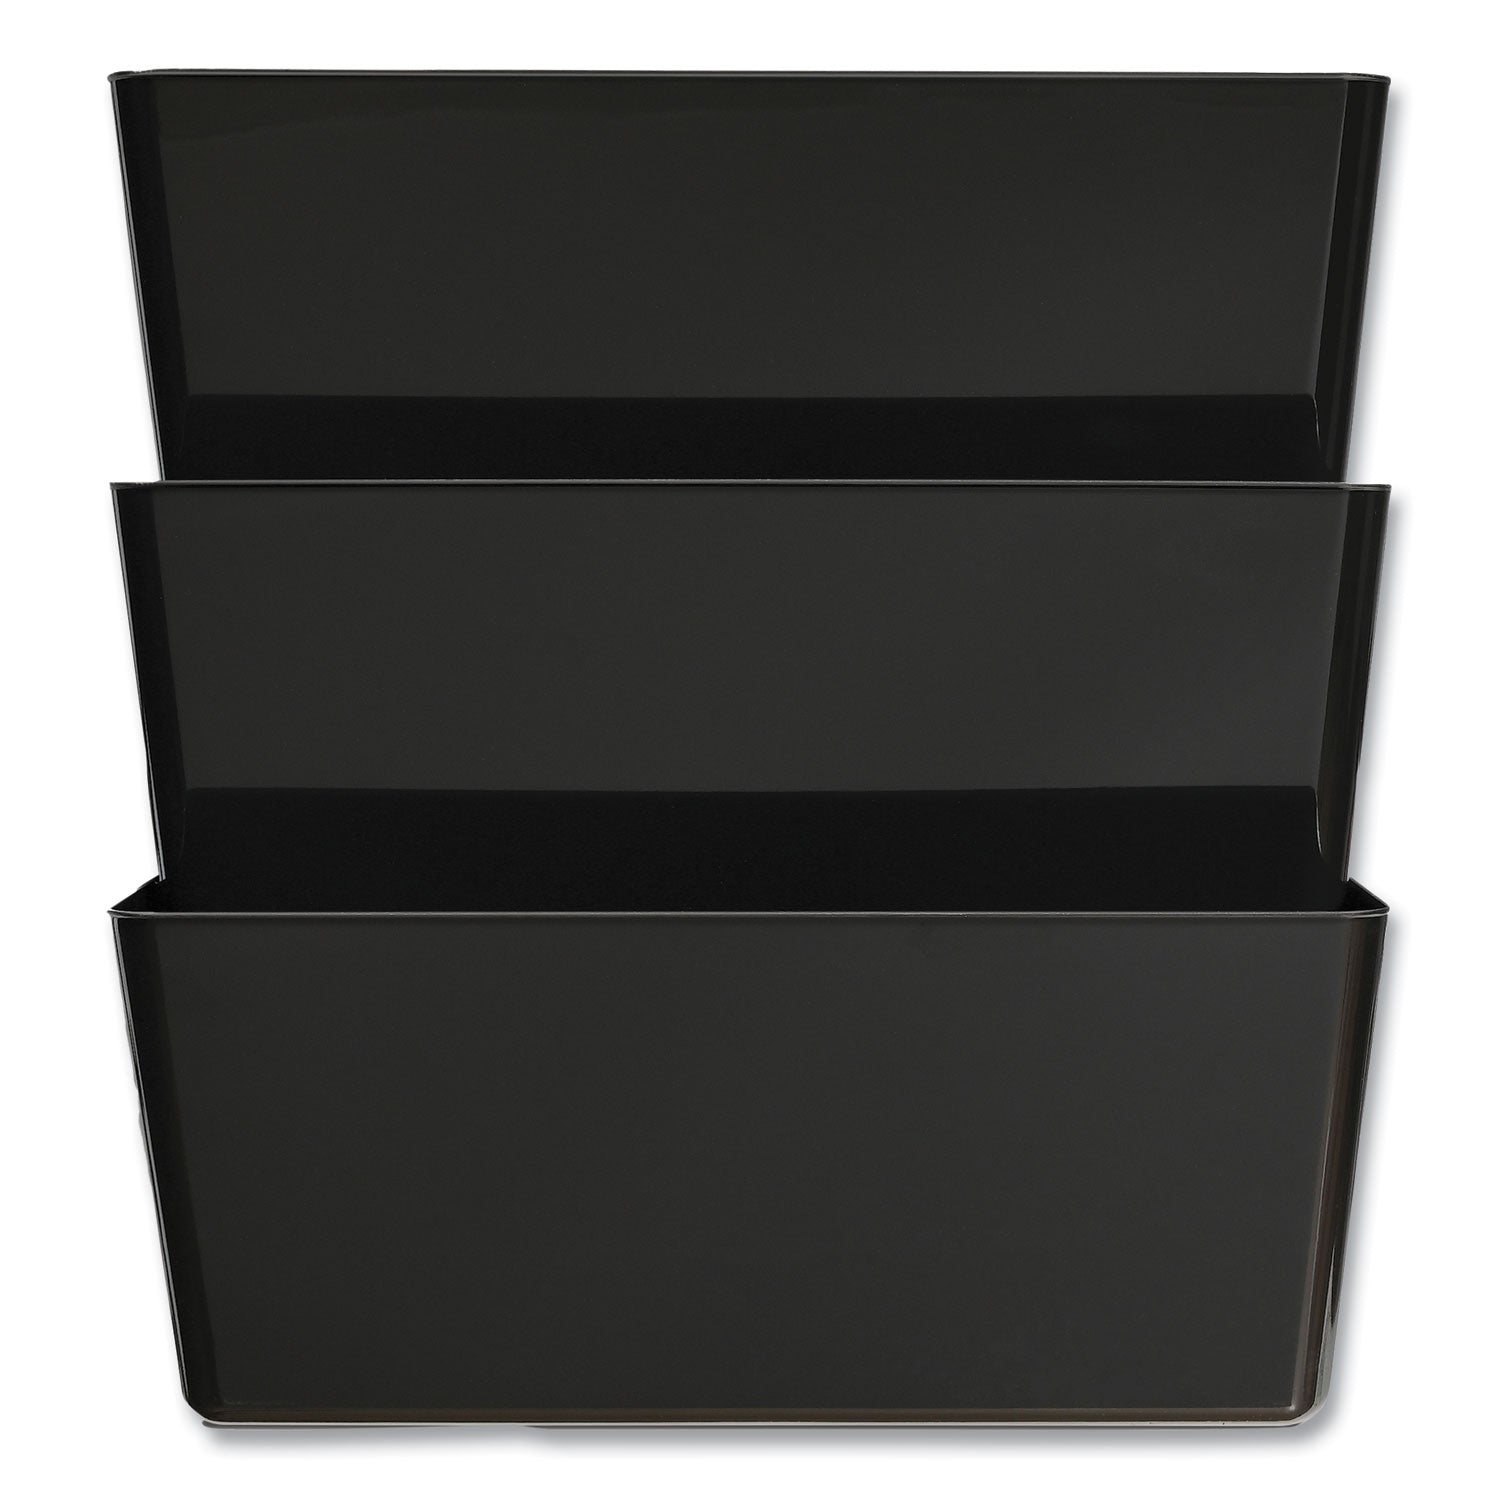 ez-link-stackable-docupocket-3-sections-legal-size-1625-x-4-x-19-black-ships-in-4-6-business-days_def74104 - 1